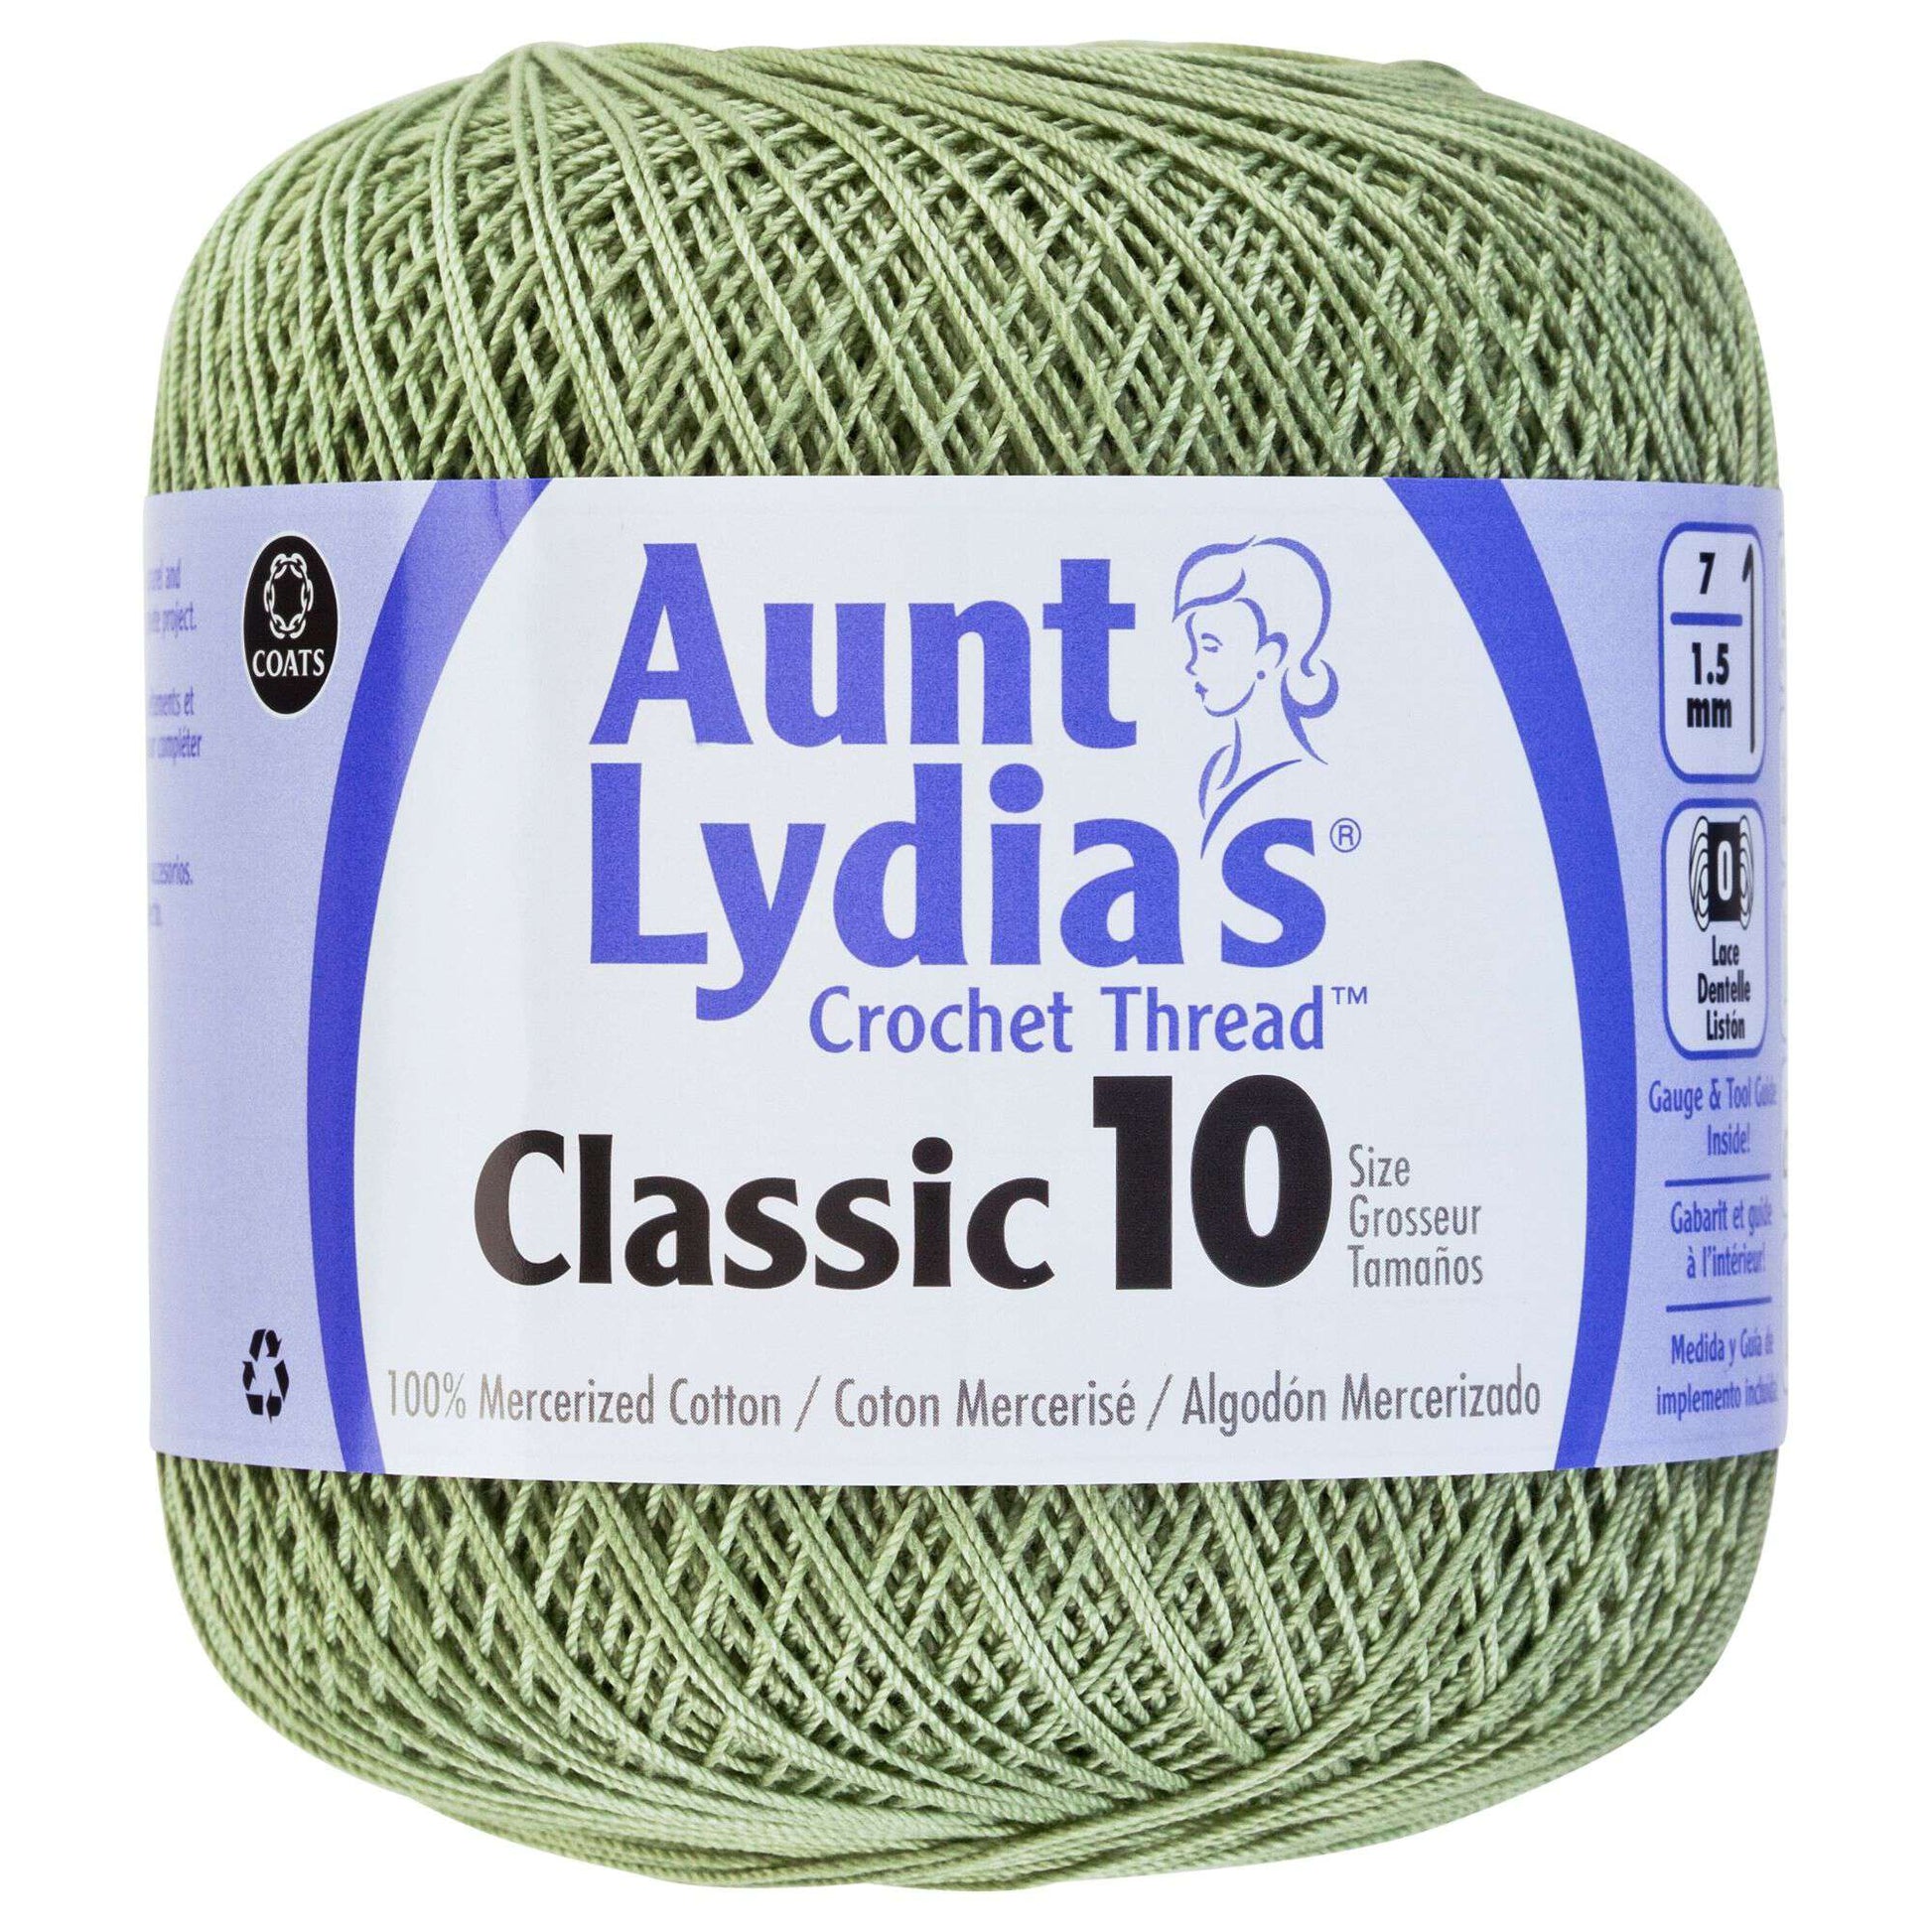 Aunt Lydia's Classic Crochet Thread Size 10 - Clearance shades Frosty Green